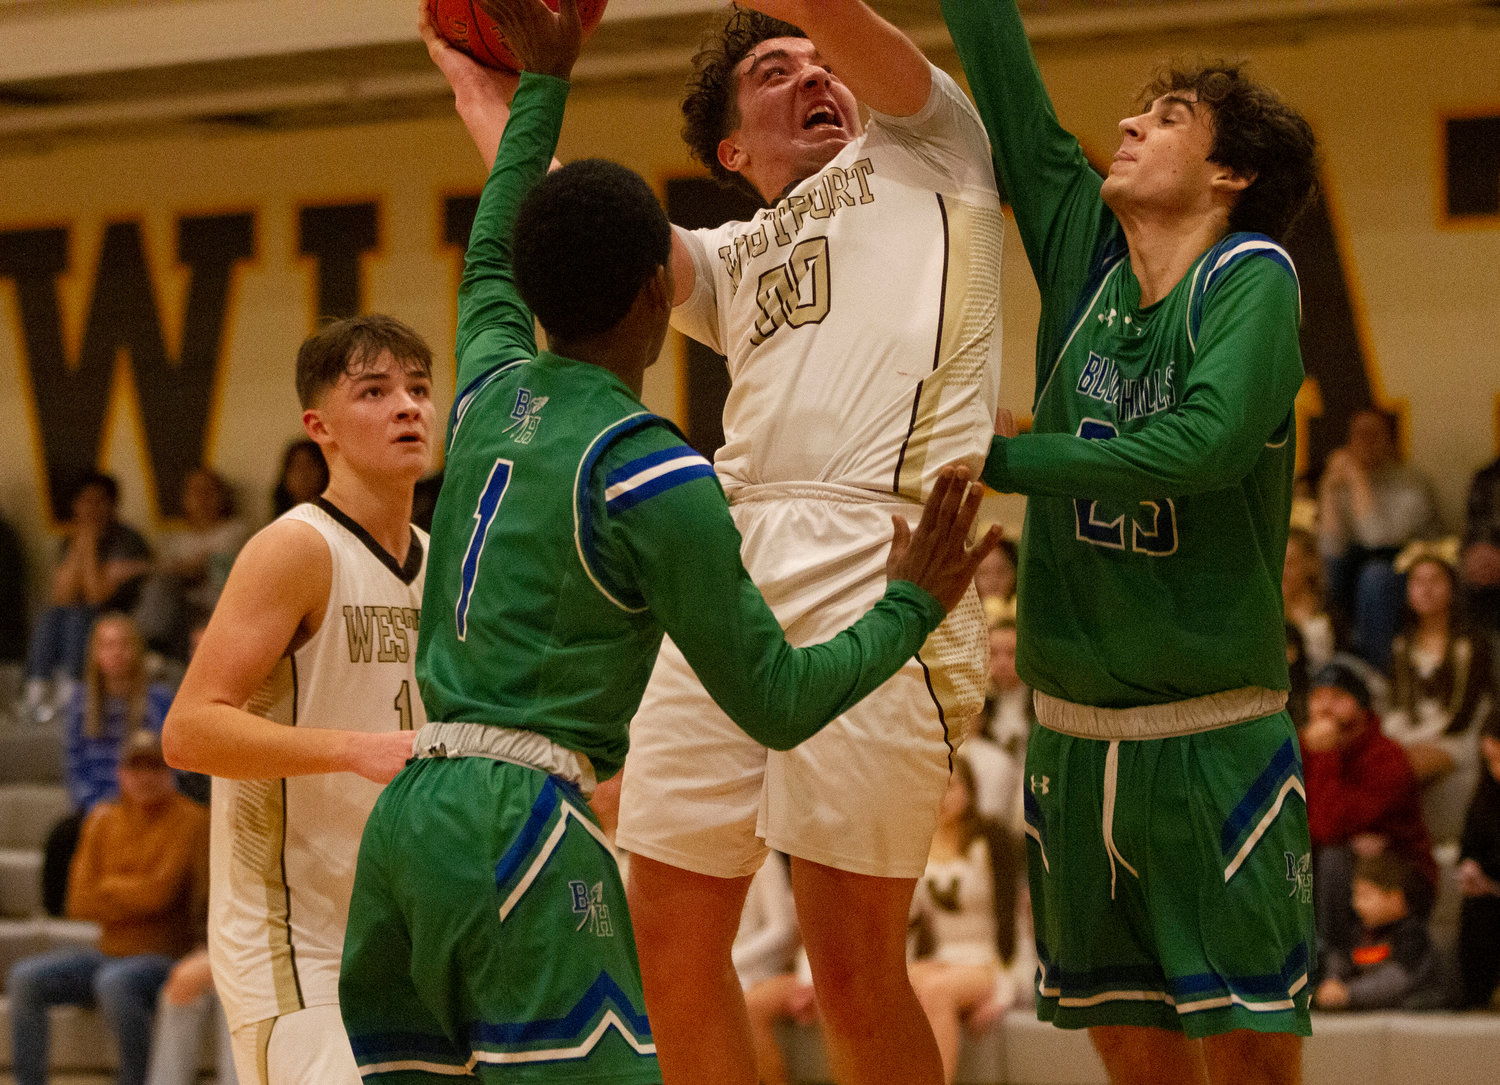 Max Morotti fights his way to the basket after grabbing an offensive rebound.